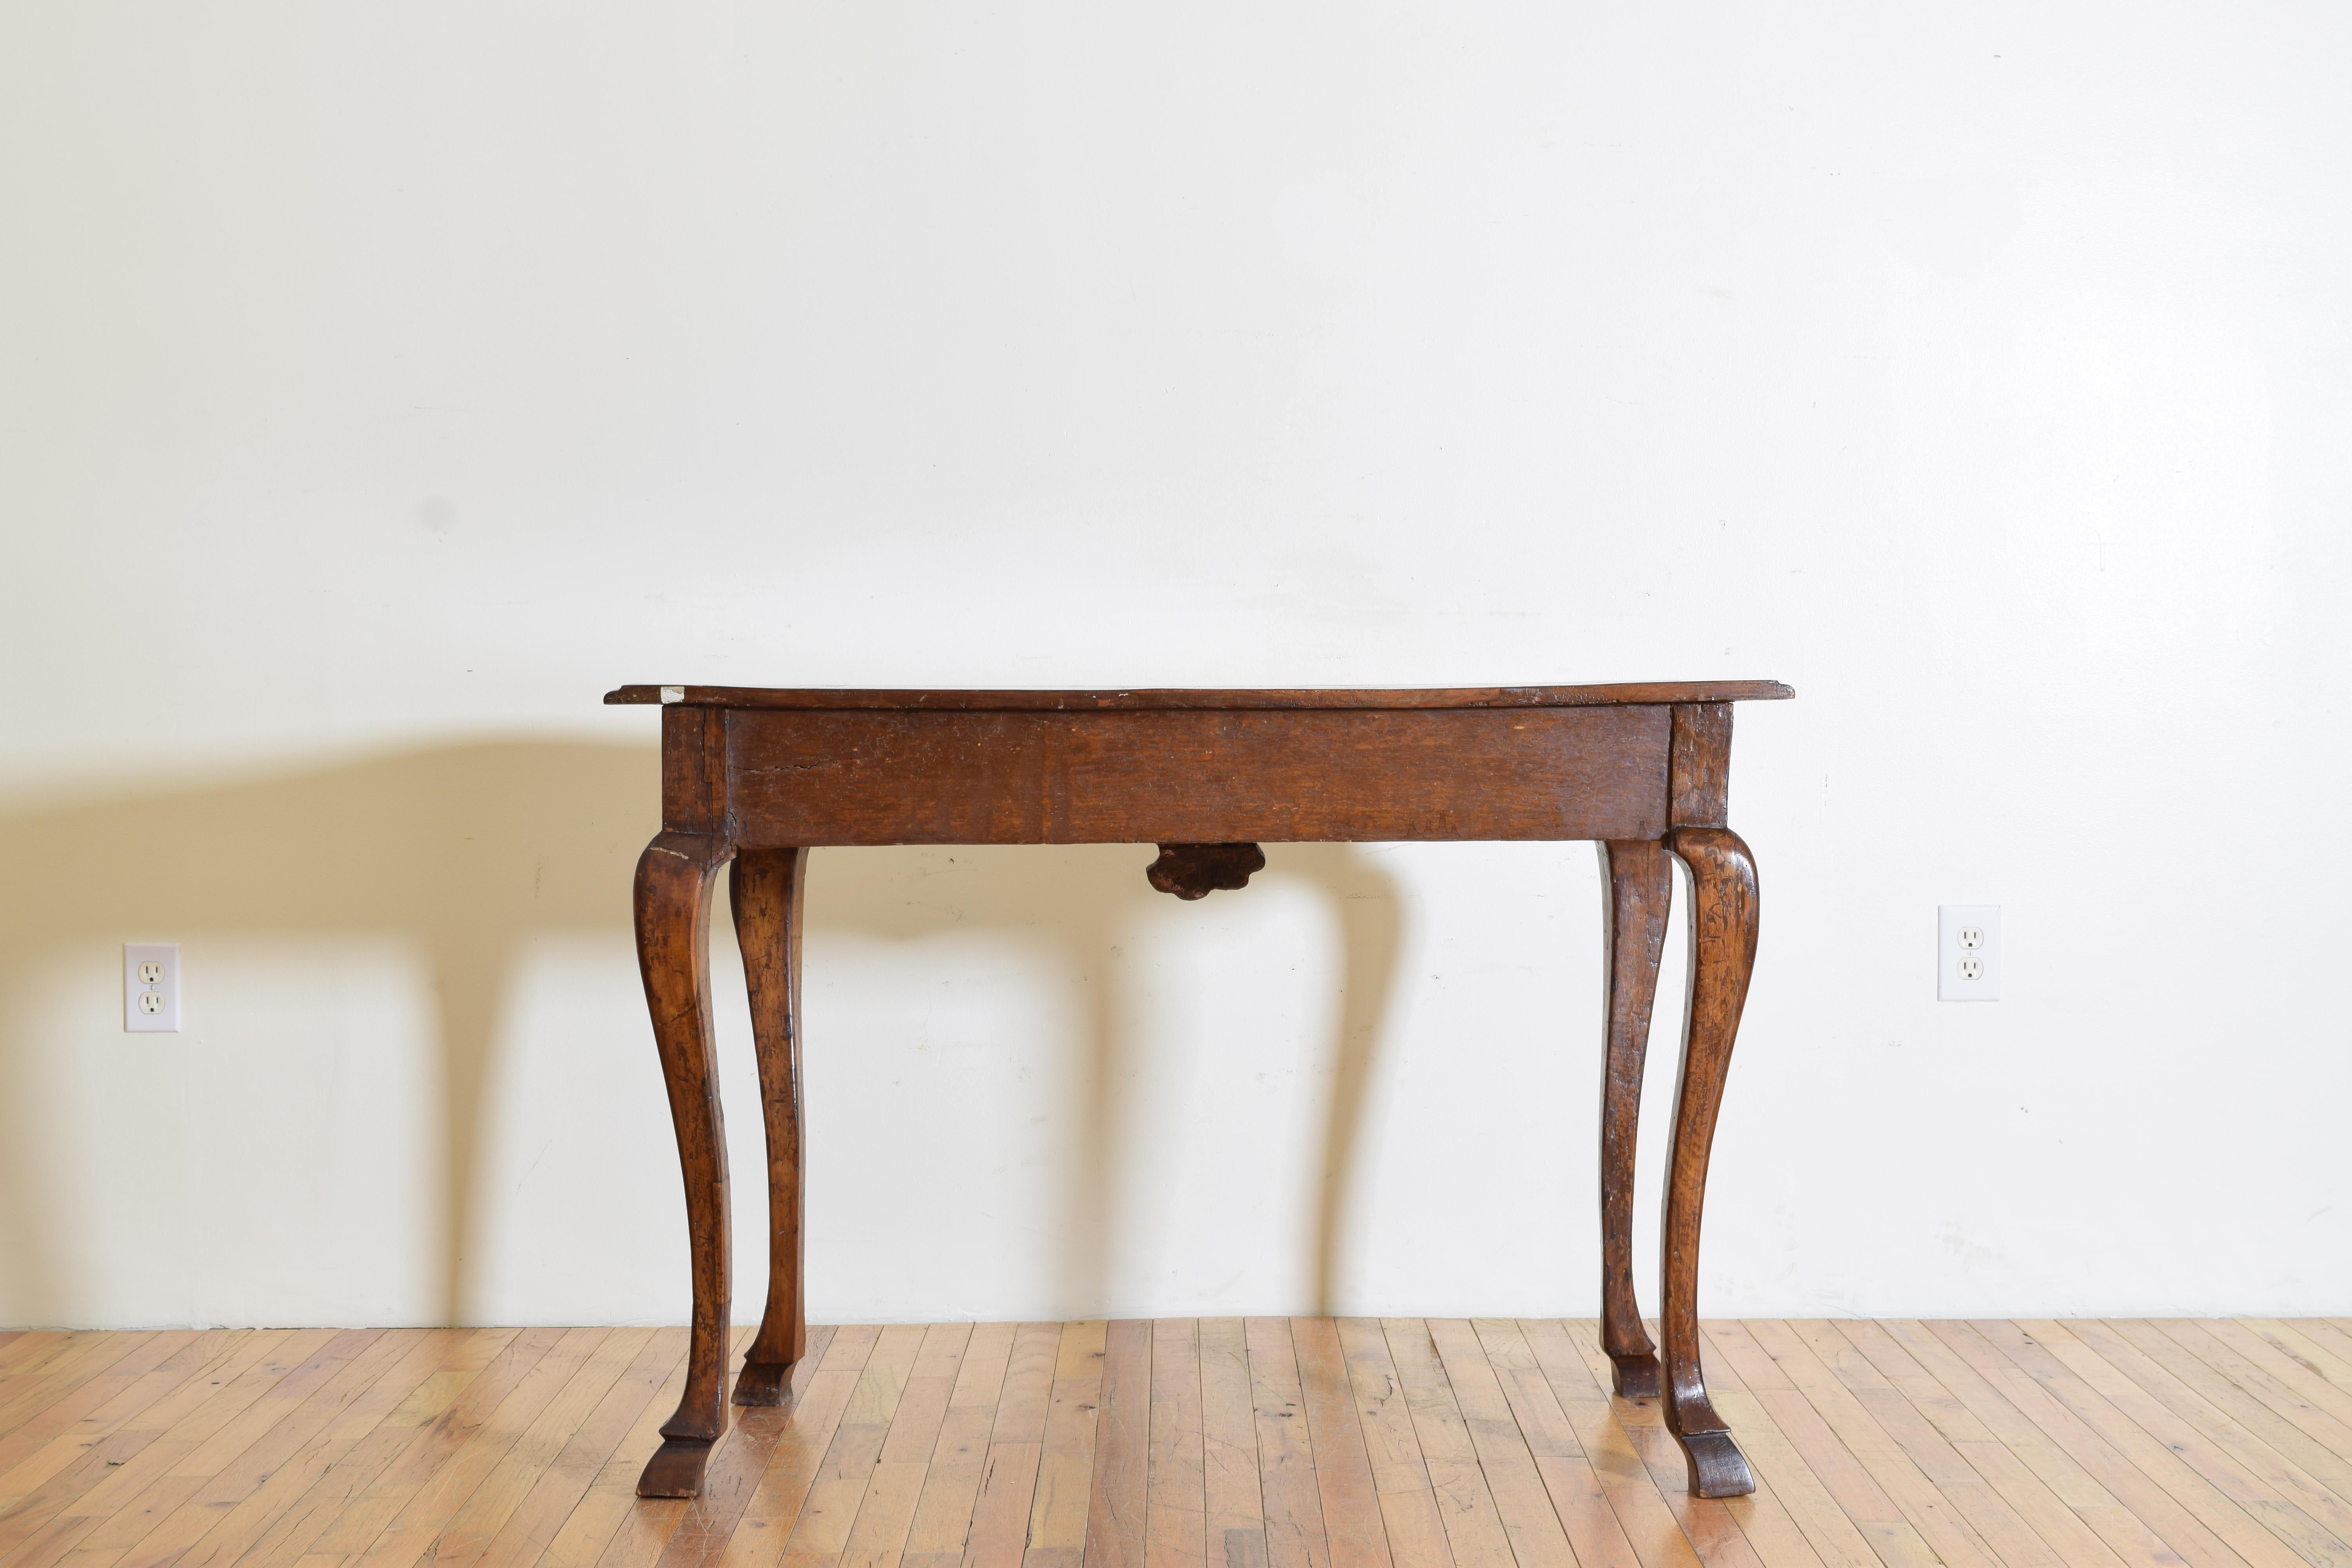 Italian, Tuscan, Louis XIV Shaped Walnut & Fir Wood Console Table, mid 18th c For Sale 7